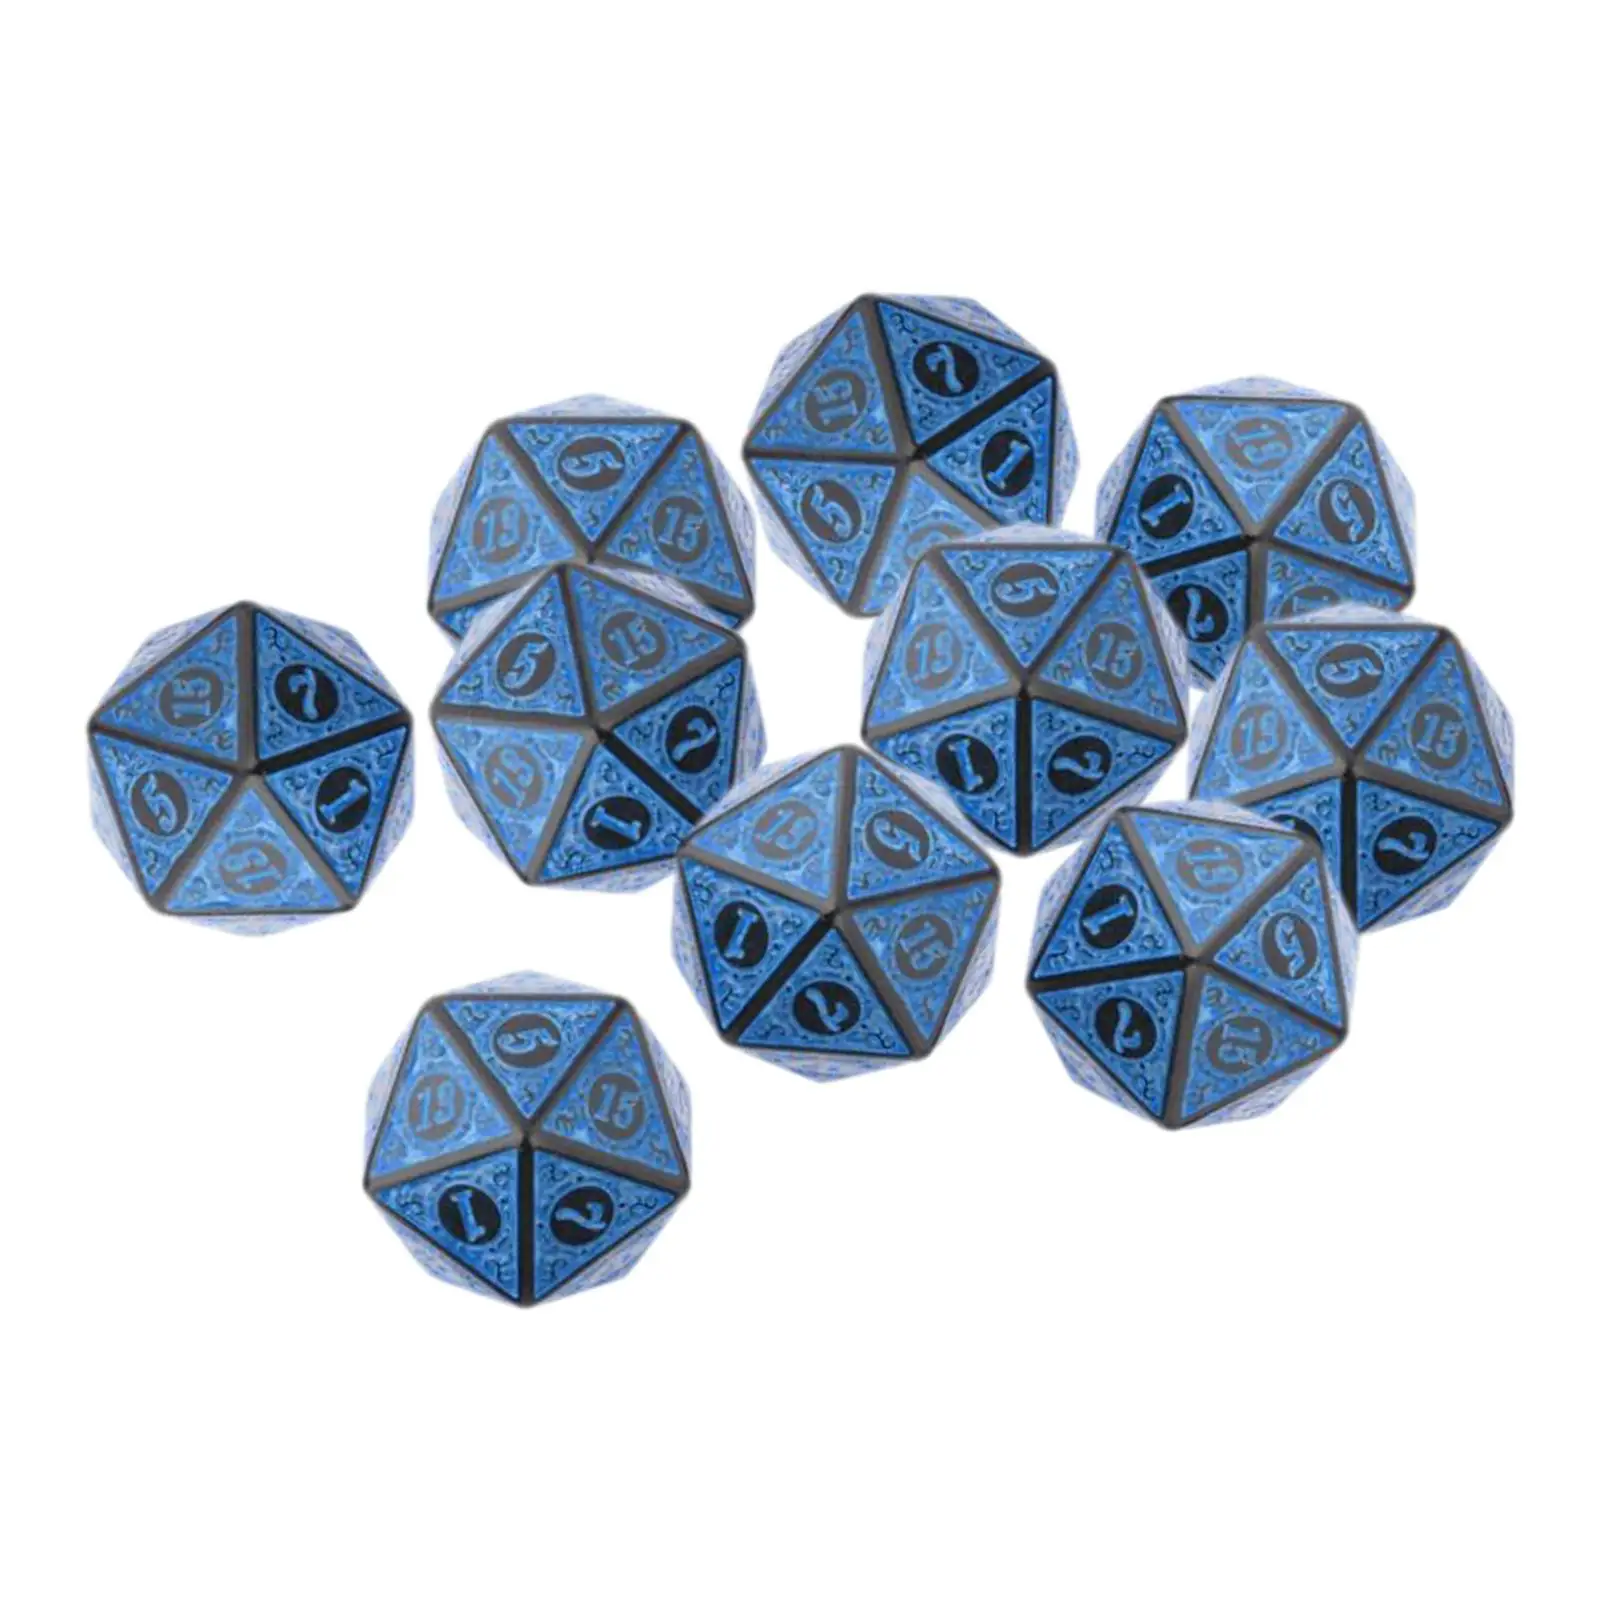 Dice Set 10Pcs Lightweight Wear Resistant Portable for RPG Teaching Toy Gift DND Party